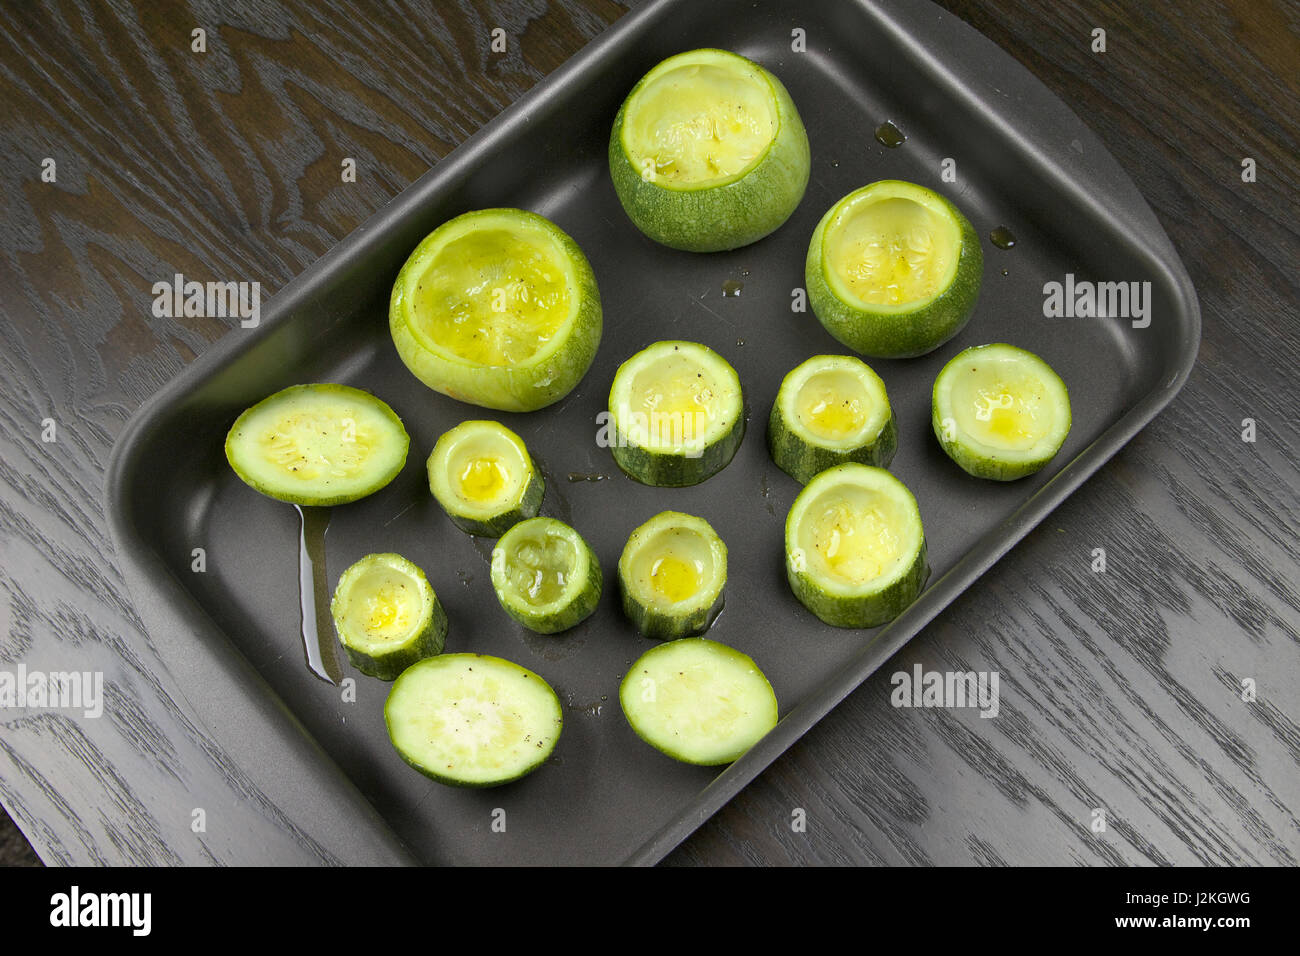 Emptied zucchini (courgette) in a baking tin lying on a dark wooden table - Preparing stuffed zucchini recipe Stock Photo